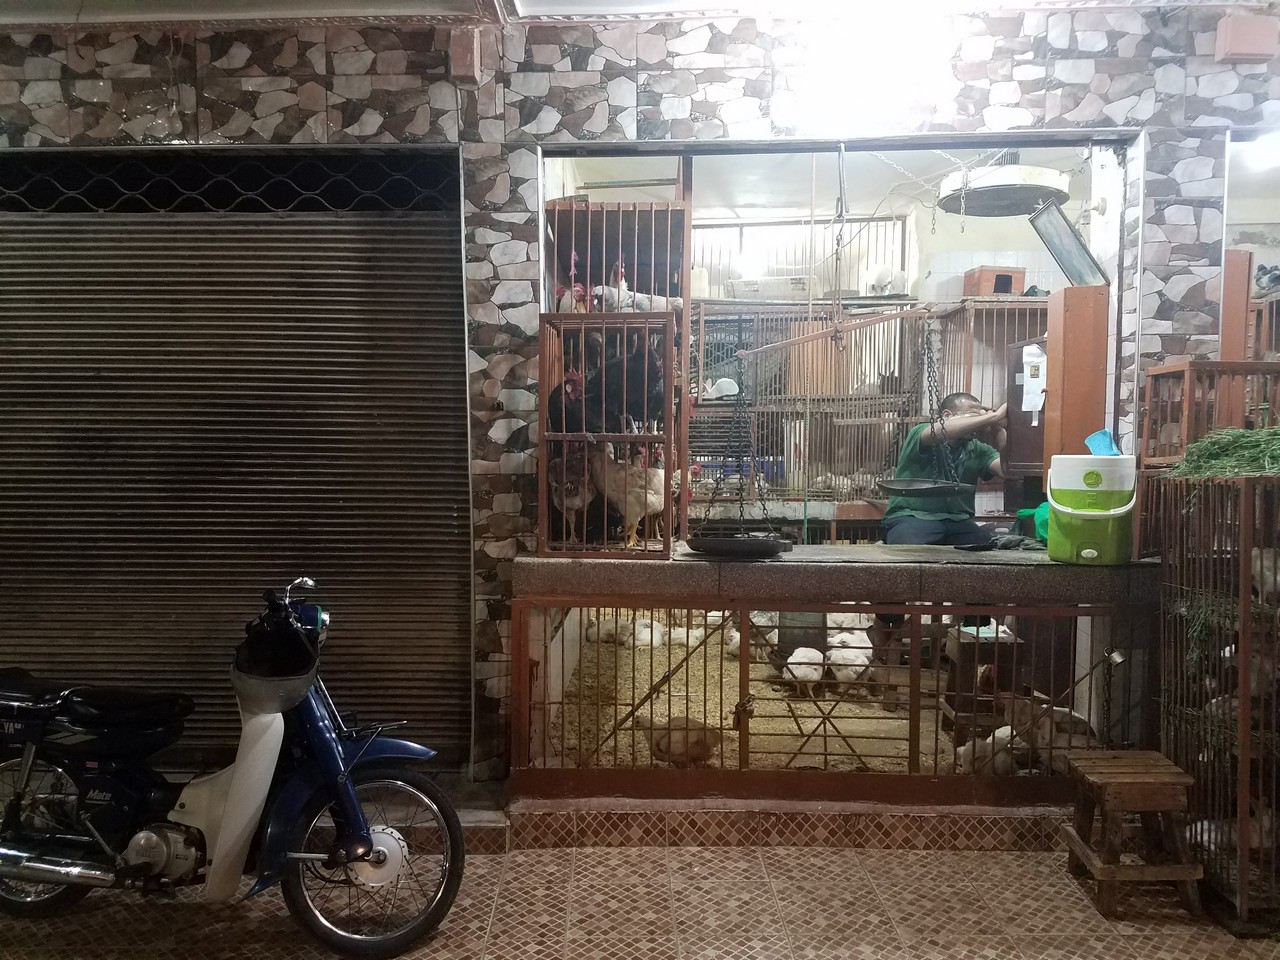 a scooter and a cage with chickens in it